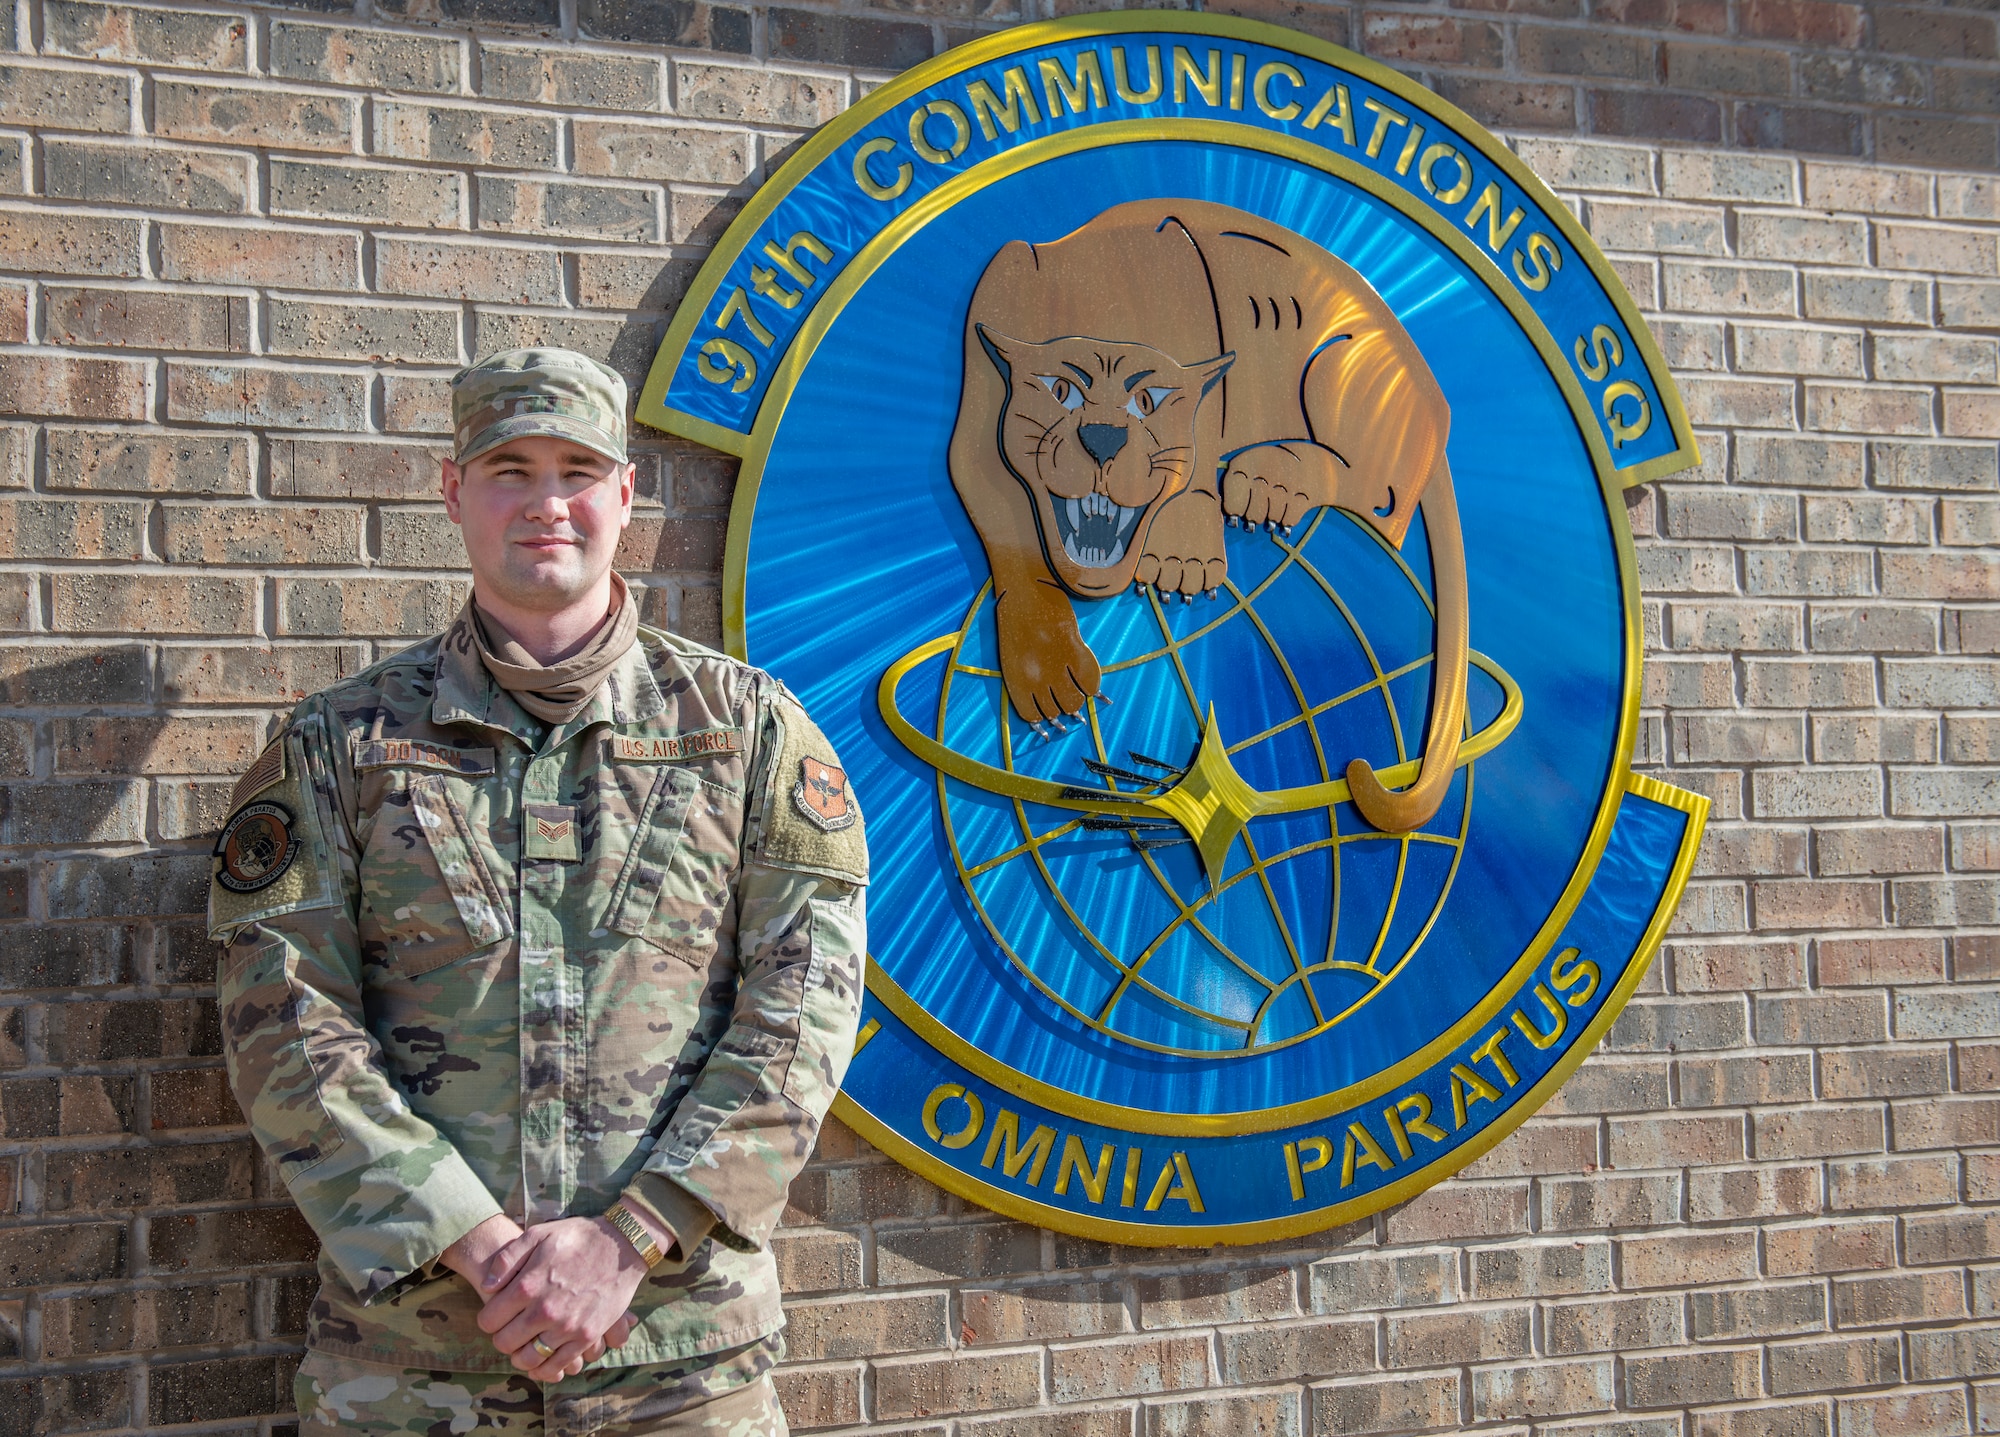 Senior Airman Carson Dotson, 97th Communications Squadron (CS) cyber transport systems journeyman, stands next to the 97th CS logo on Jan. 20, 2020, at Altus Air Force Base, Oklahoma. The application period for eligible Airmen to transfer into the U.S. Space Force opened on May 1, 2020 while Dotson was deployed to Kuwait. Despite the distance, he was still able to work with his Altus leadership and get his application submitted in time for the cut off. (U.S. Air Force photo by Airman 1st Class Amanda Lovelace)